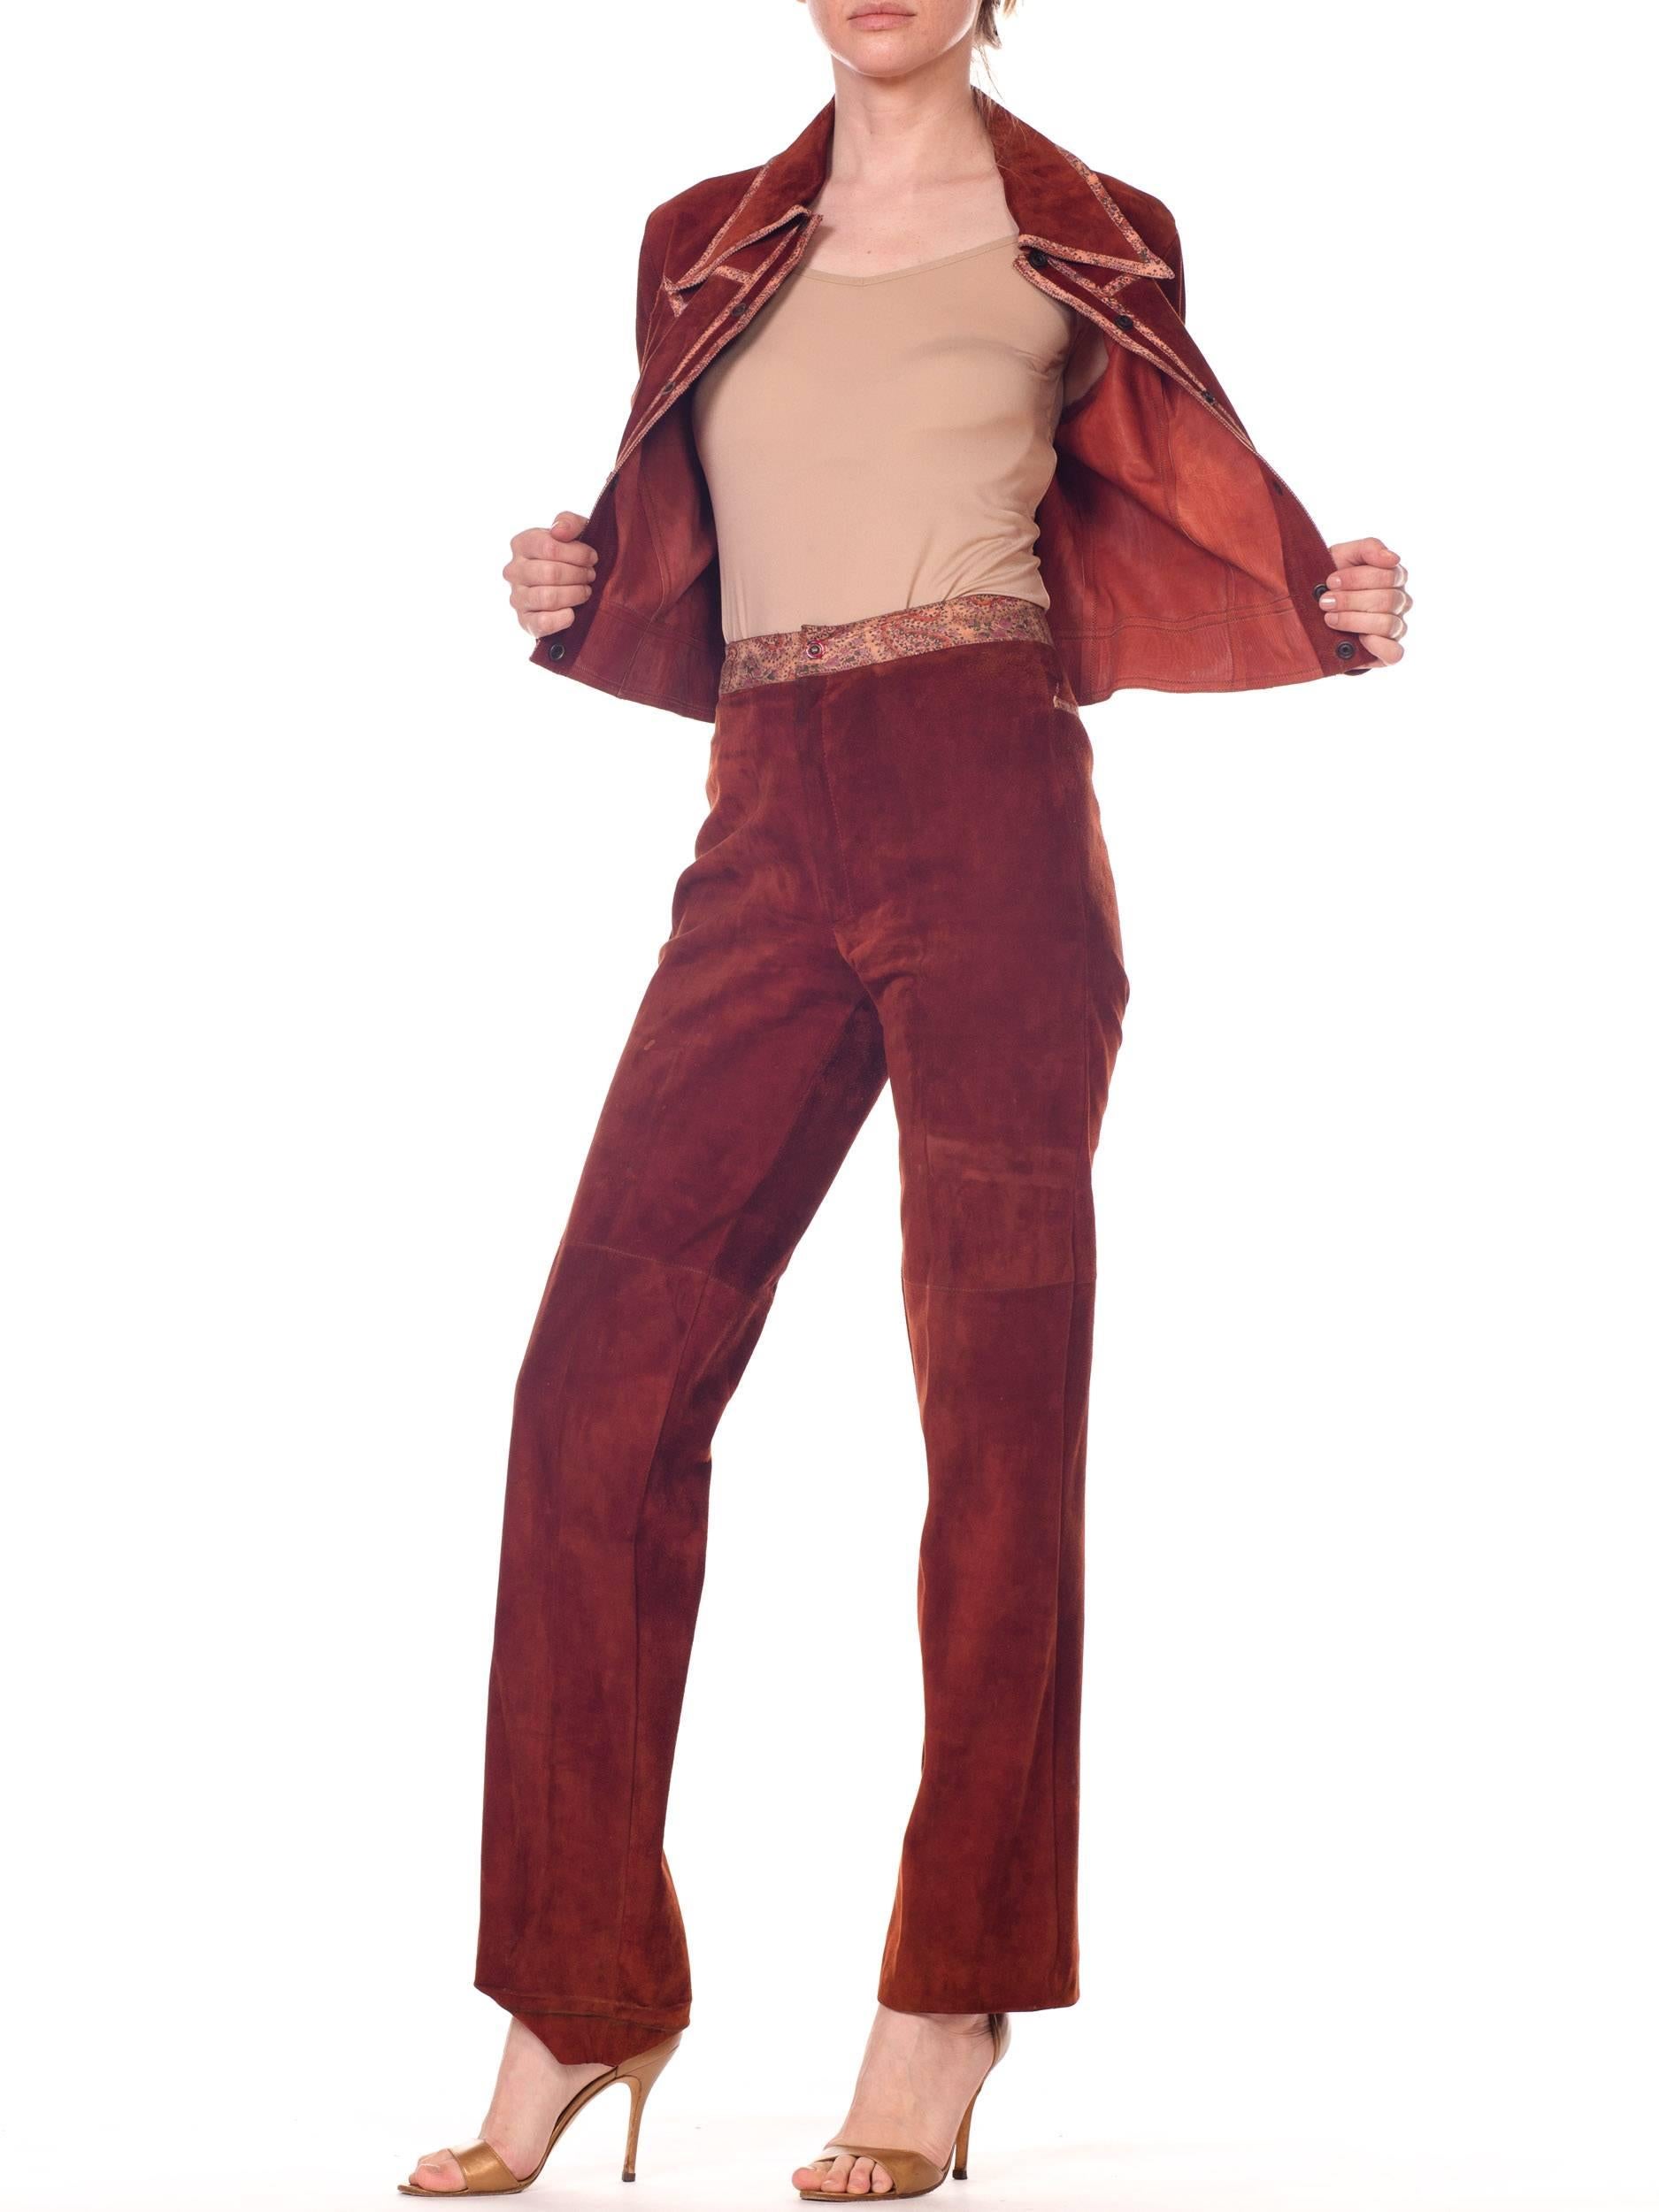 Roberto Cavalli Cognac Suede Pants and Jacket set with printed trims 3